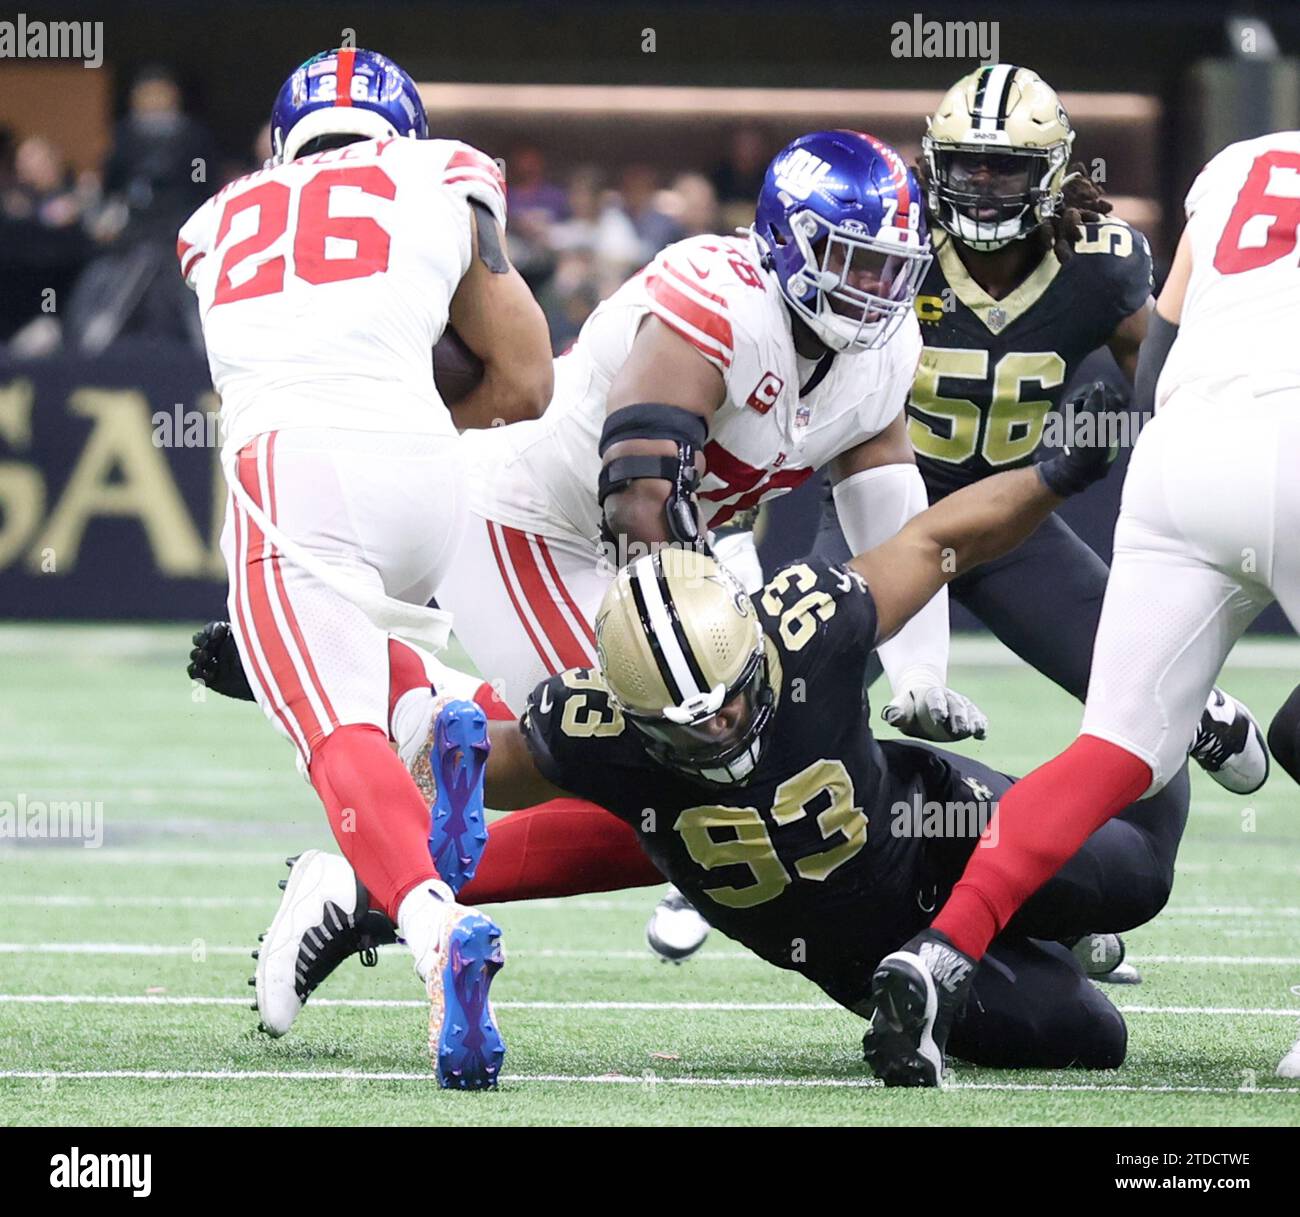 New Orleans, USA. 17th Dec, 2023. New Orleans Saints defensive tackle Nathan Shepherd (93) tries to trip up New York Giants running back Saquon Barkley (26) during a National Football League game at the Caesars Superdome in New Orleans, Louisiana on Sunday, December 17, 2023. (Photo by Peter G. Forest/Sipa USA) Credit: Sipa USA/Alamy Live News Stock Photo